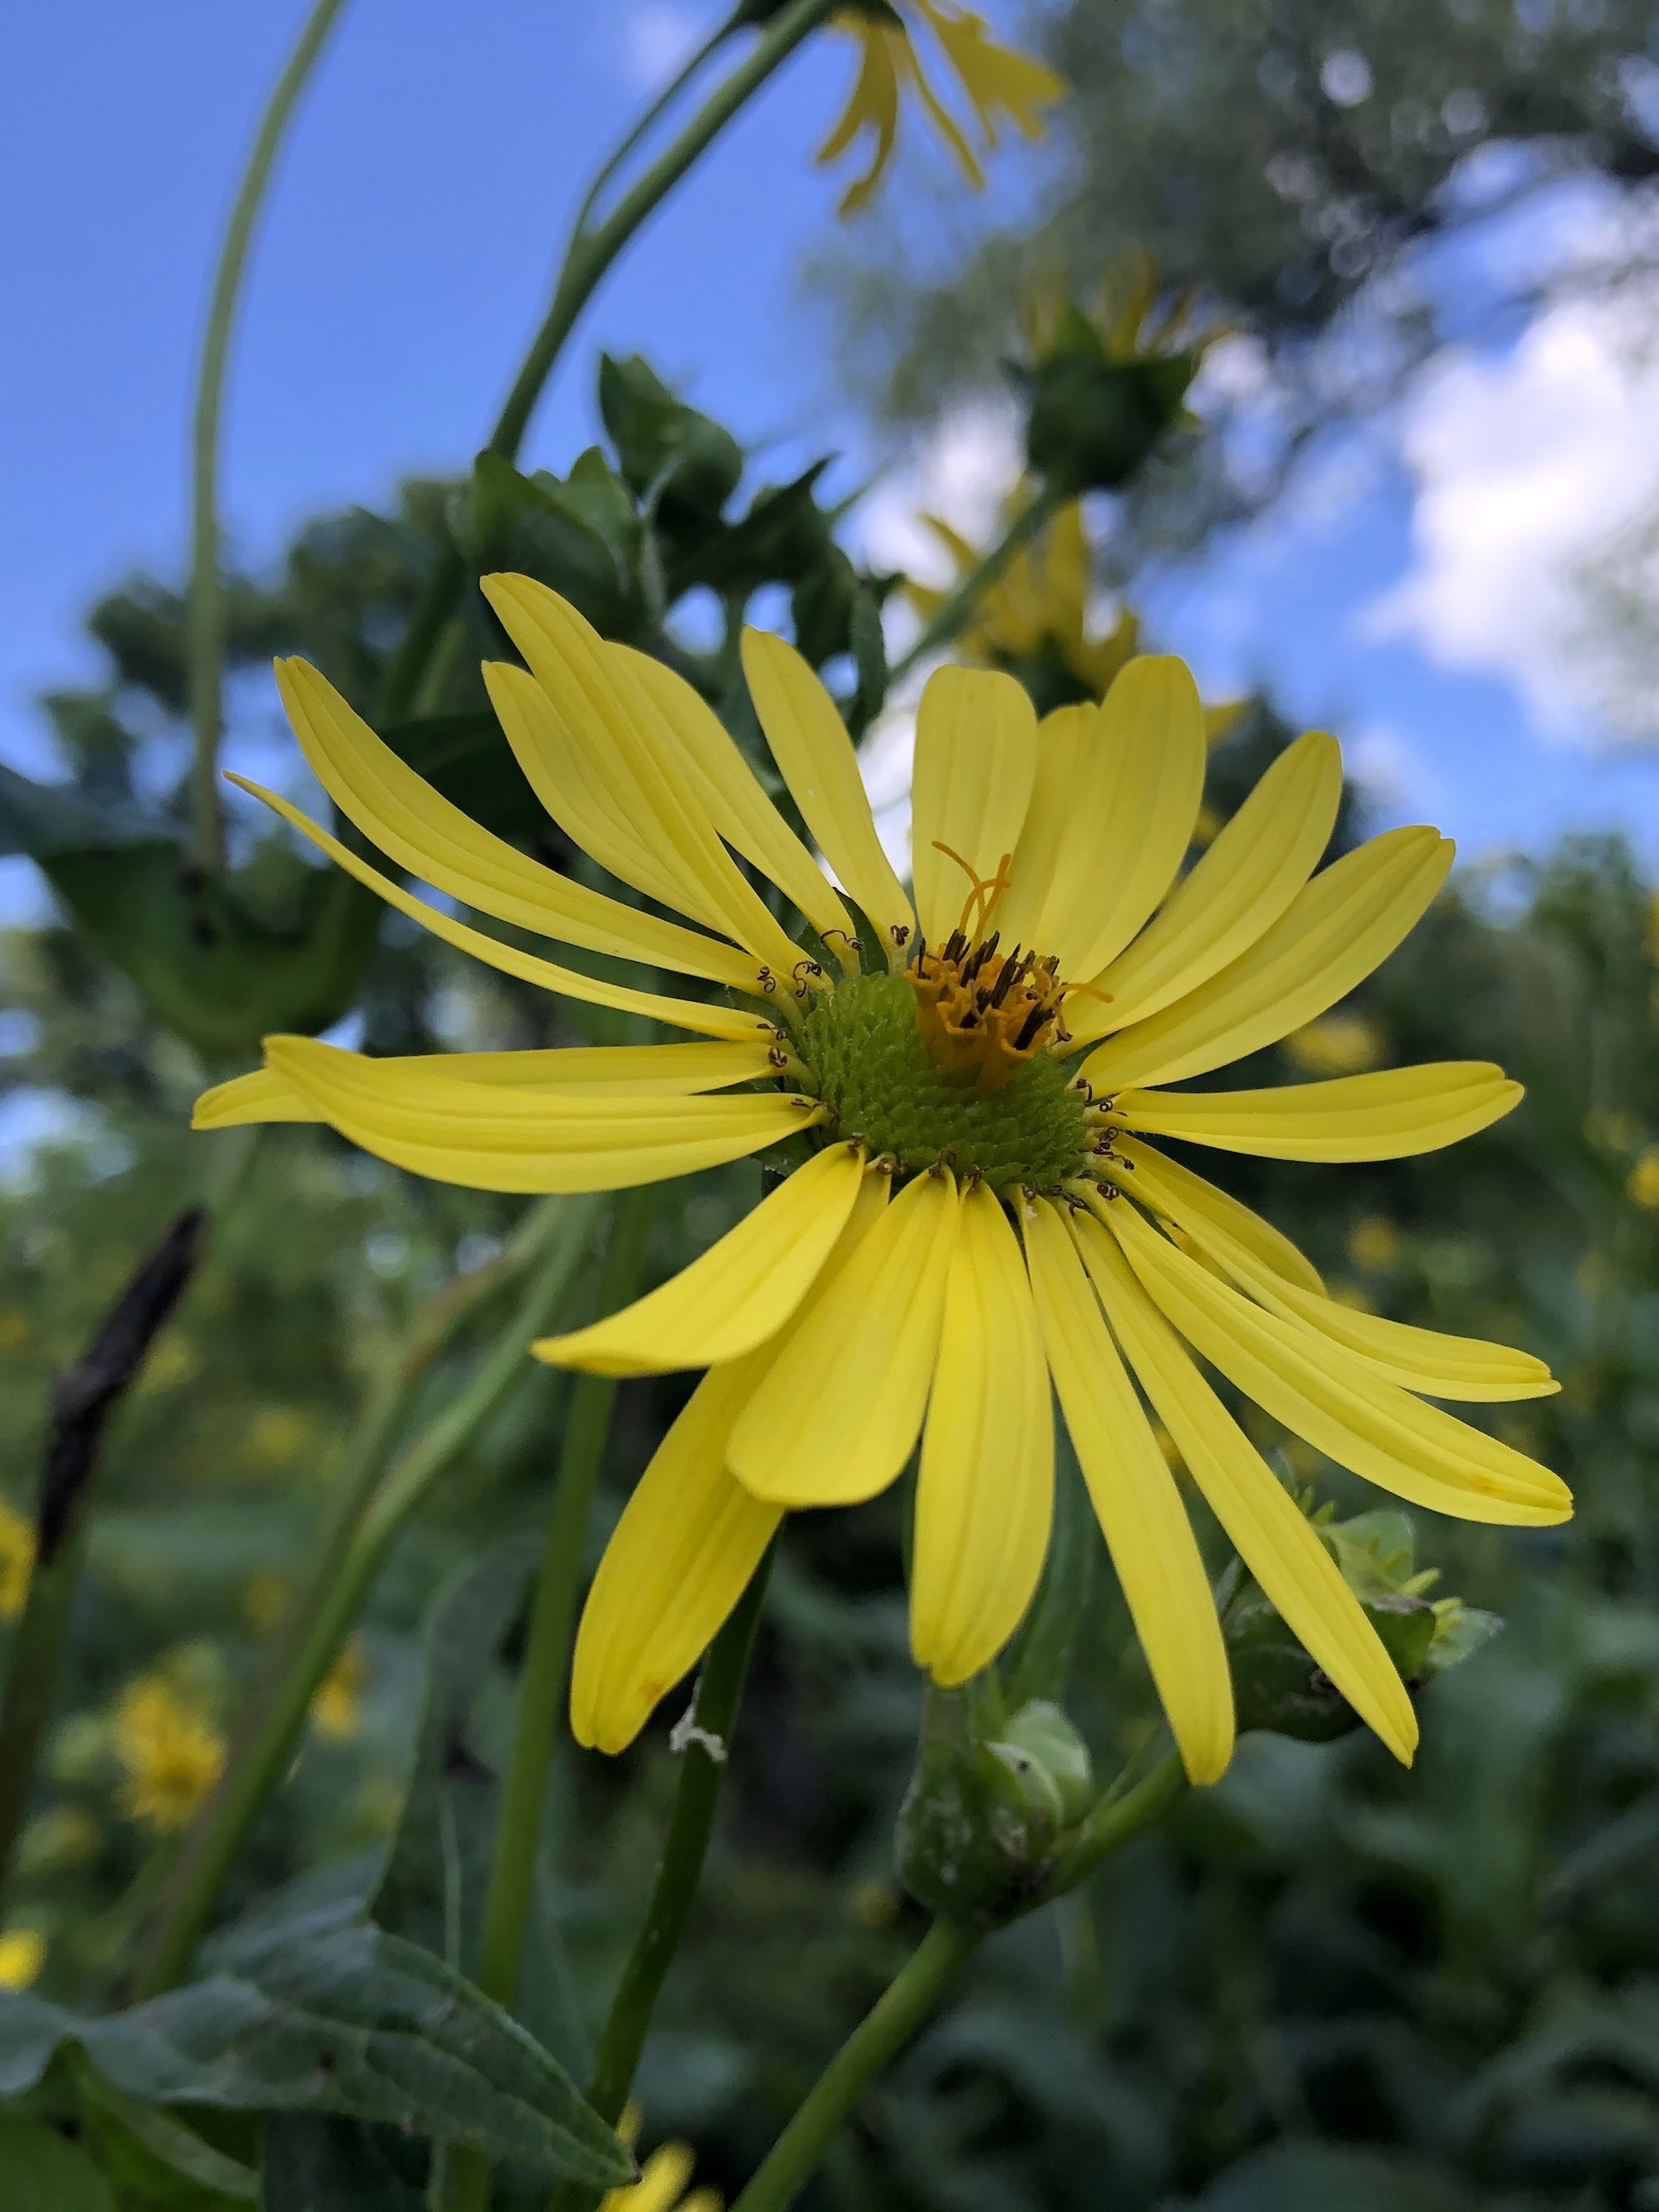 Cup Plant in Marion Dunn Prairie on August 4, 2019.